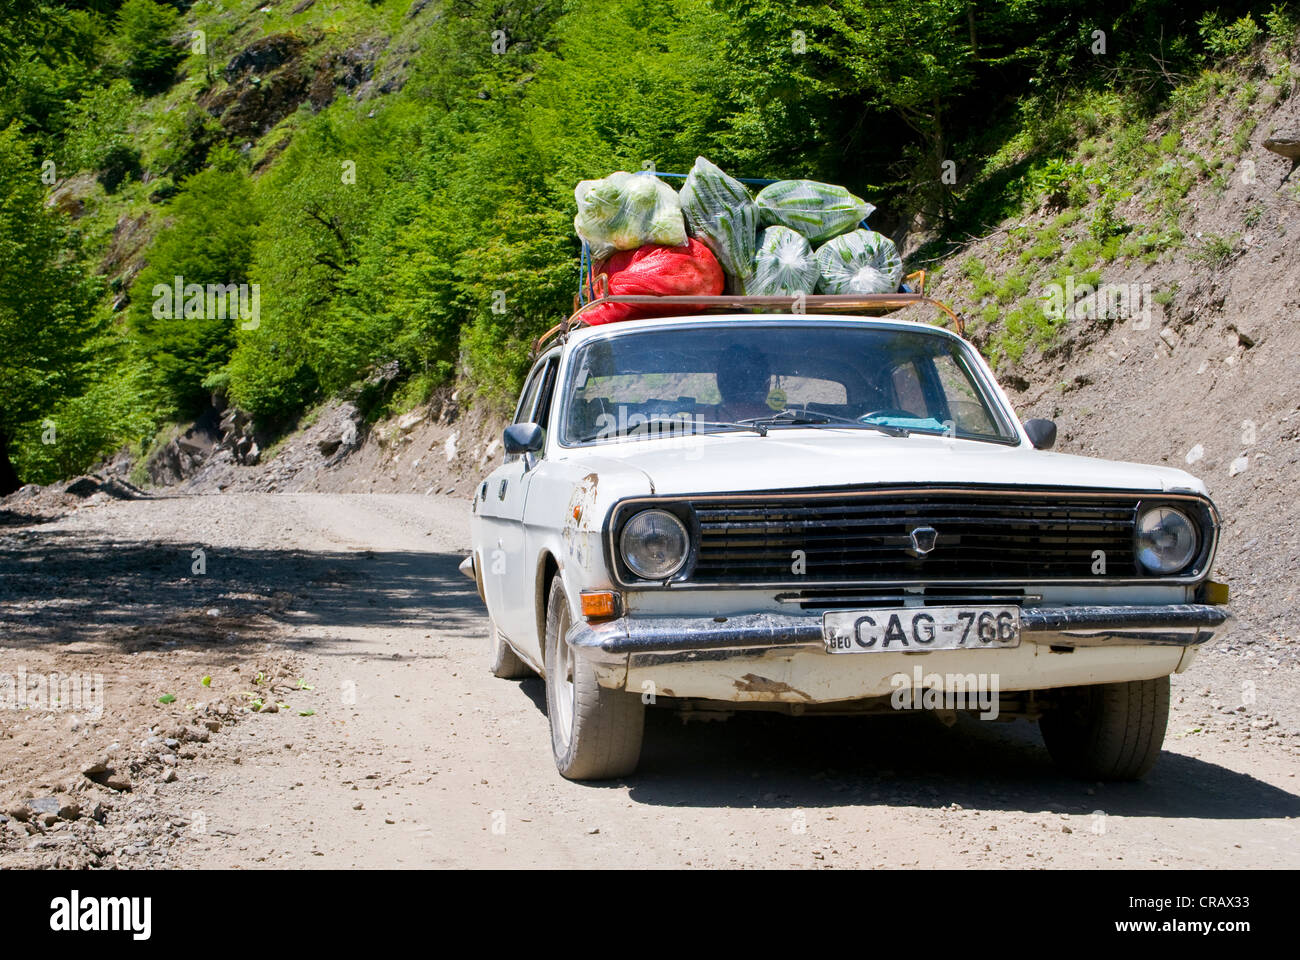 Overloaded car on its way to the Svaneti province, Georgia, Caucasus region, Middle East Stock Photo